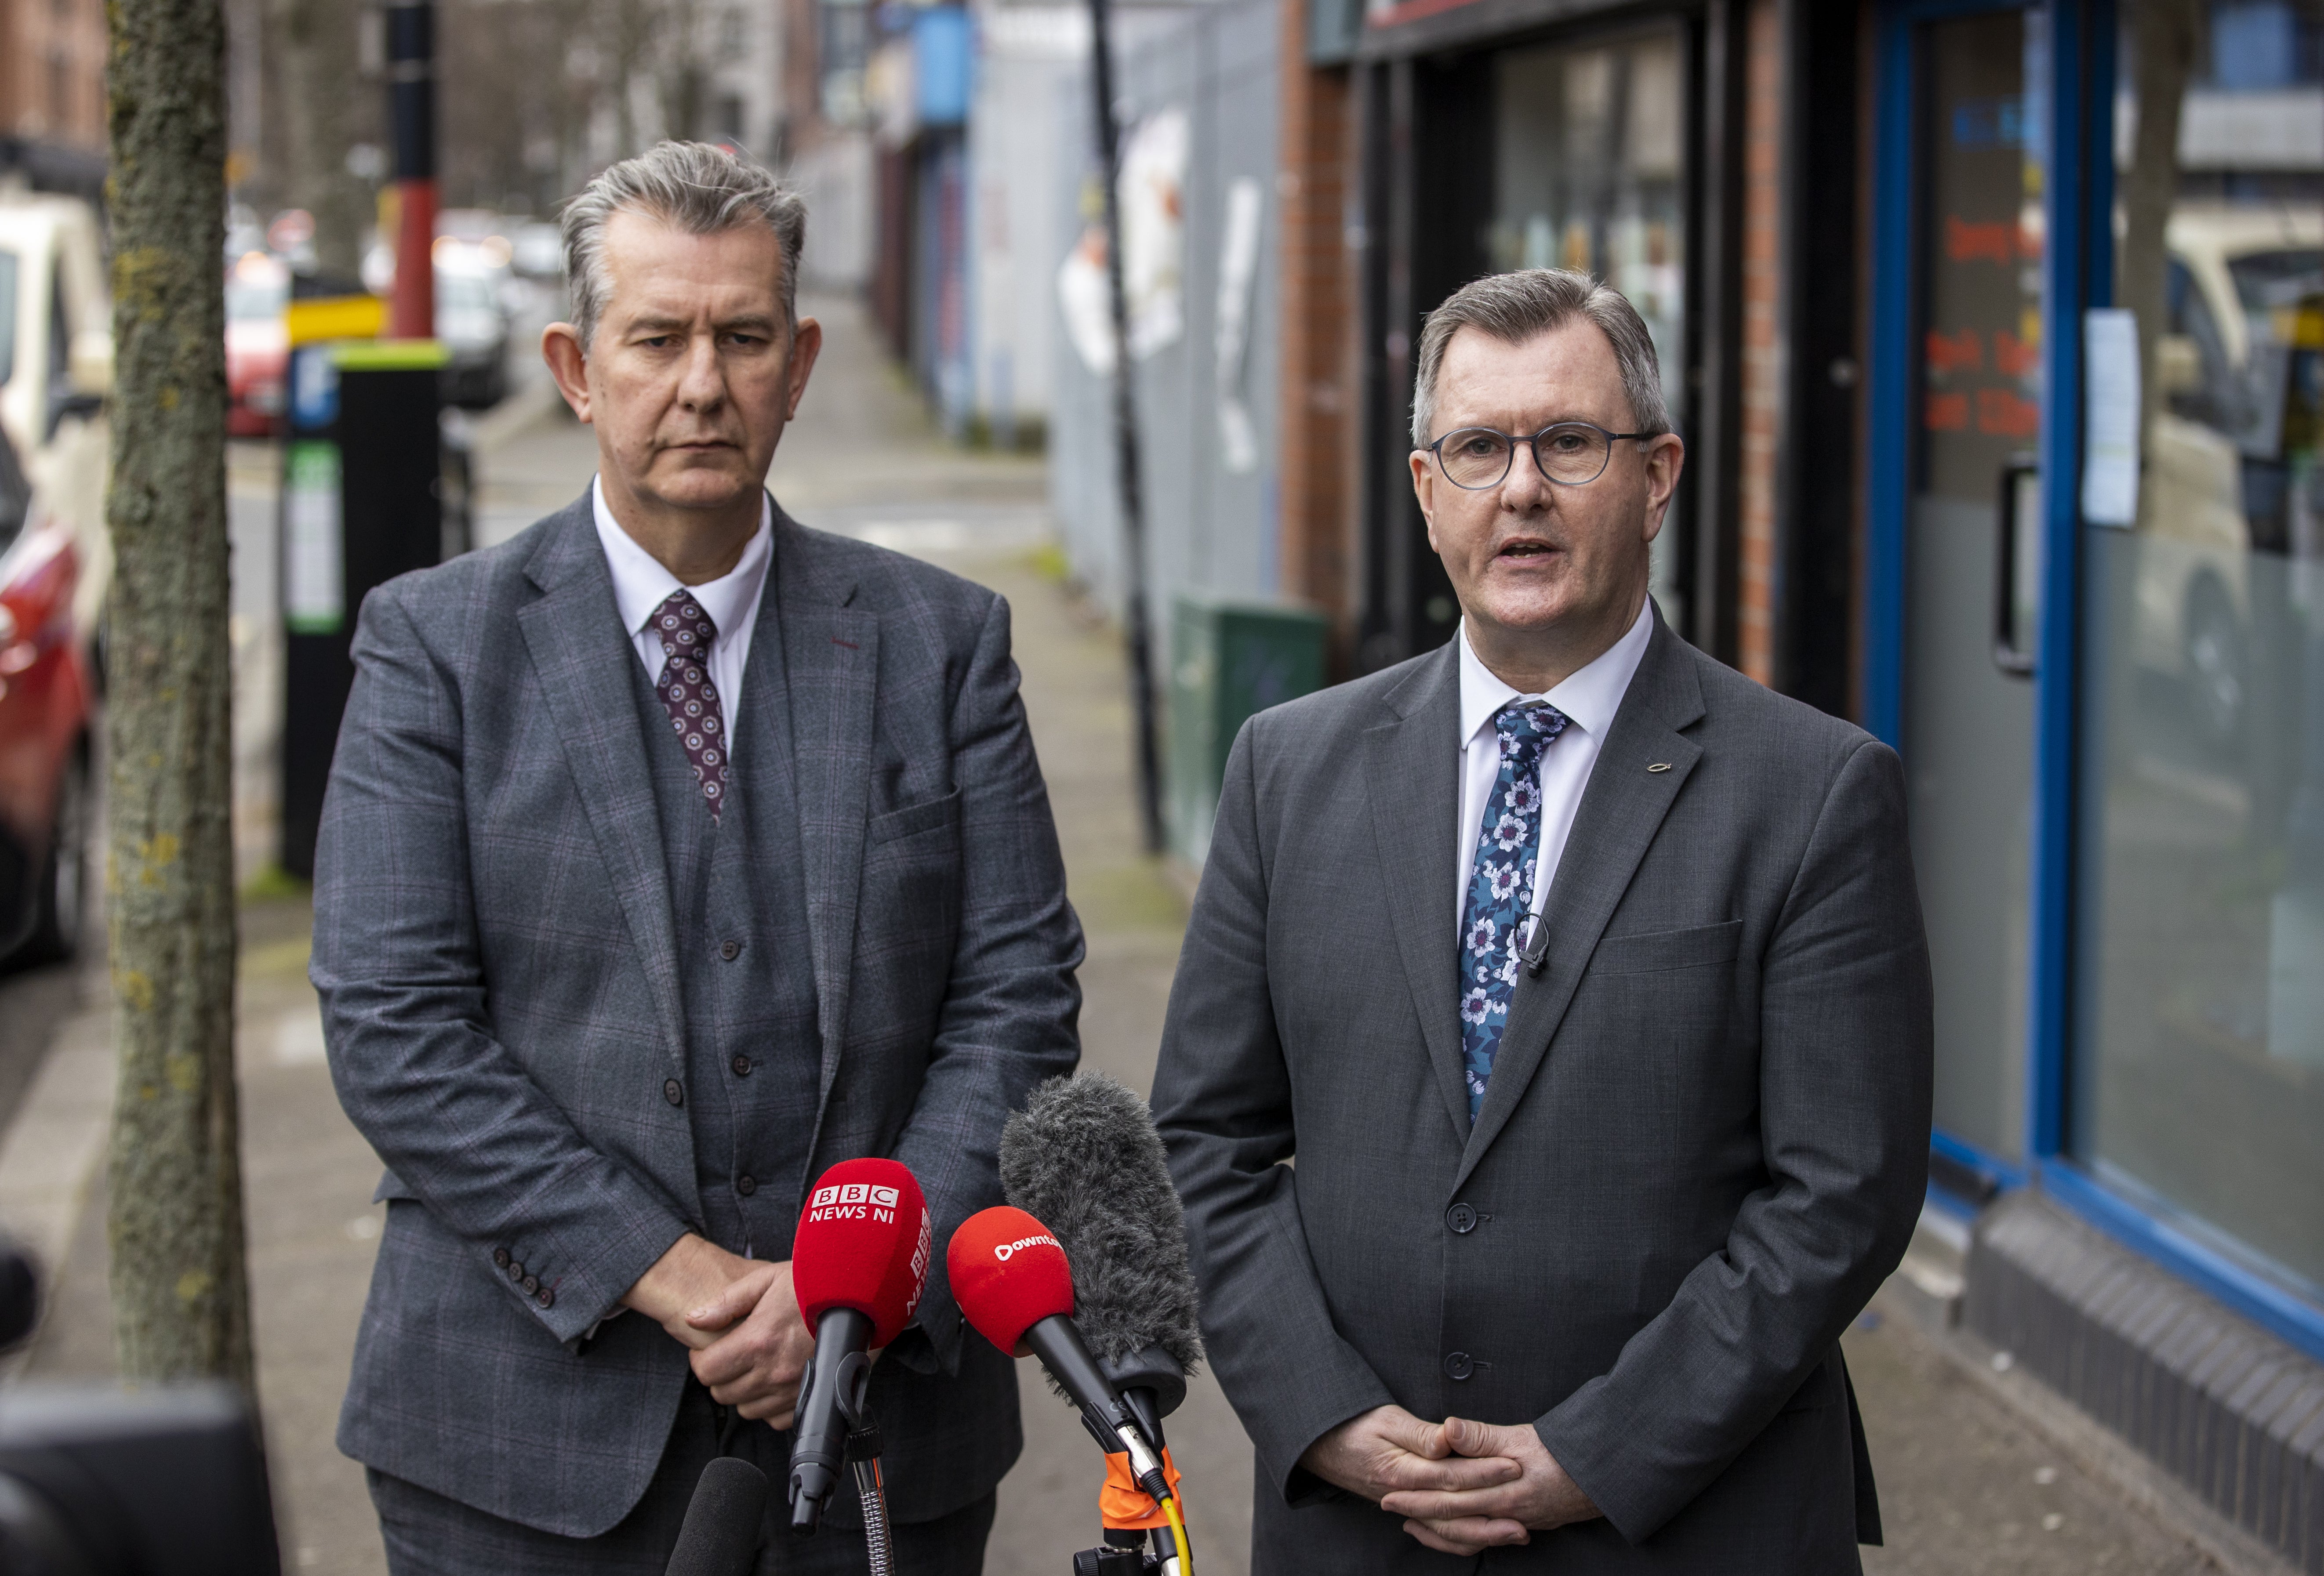 DUP leader Sir Jeffrey Donaldson (right) with his party colleague Edwin Poots, said the DUP supported the call for a new investigation into Omagh (Liam McBurney/PA)